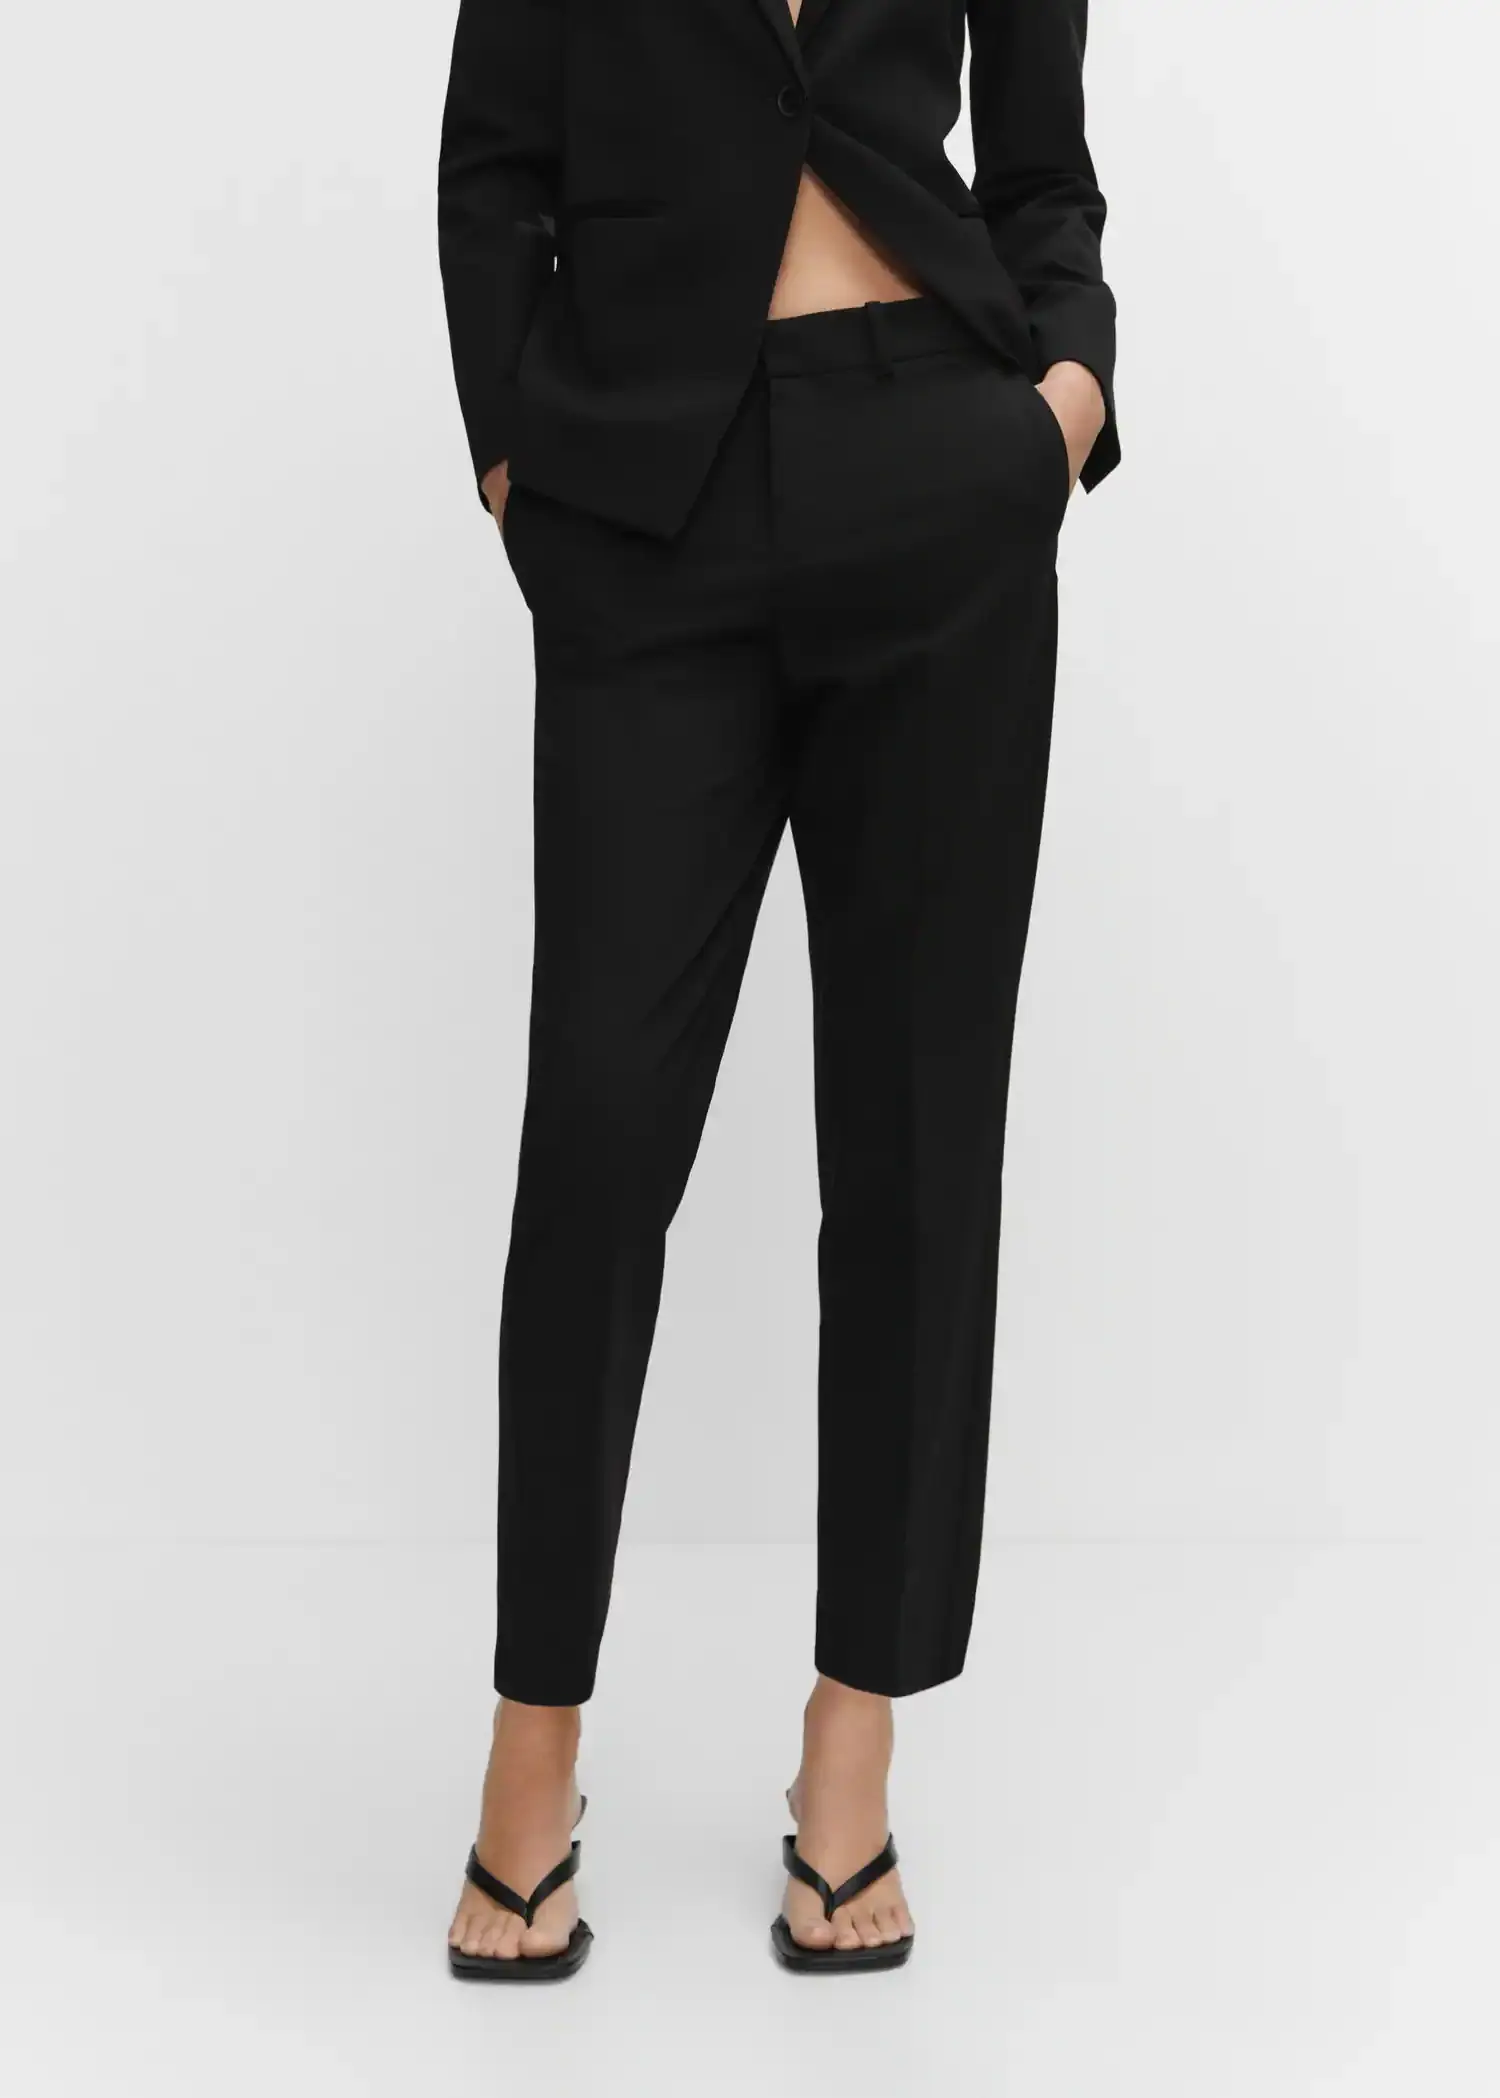 Mango Straight suit pants. a person wearing black pants and a black shirt. 